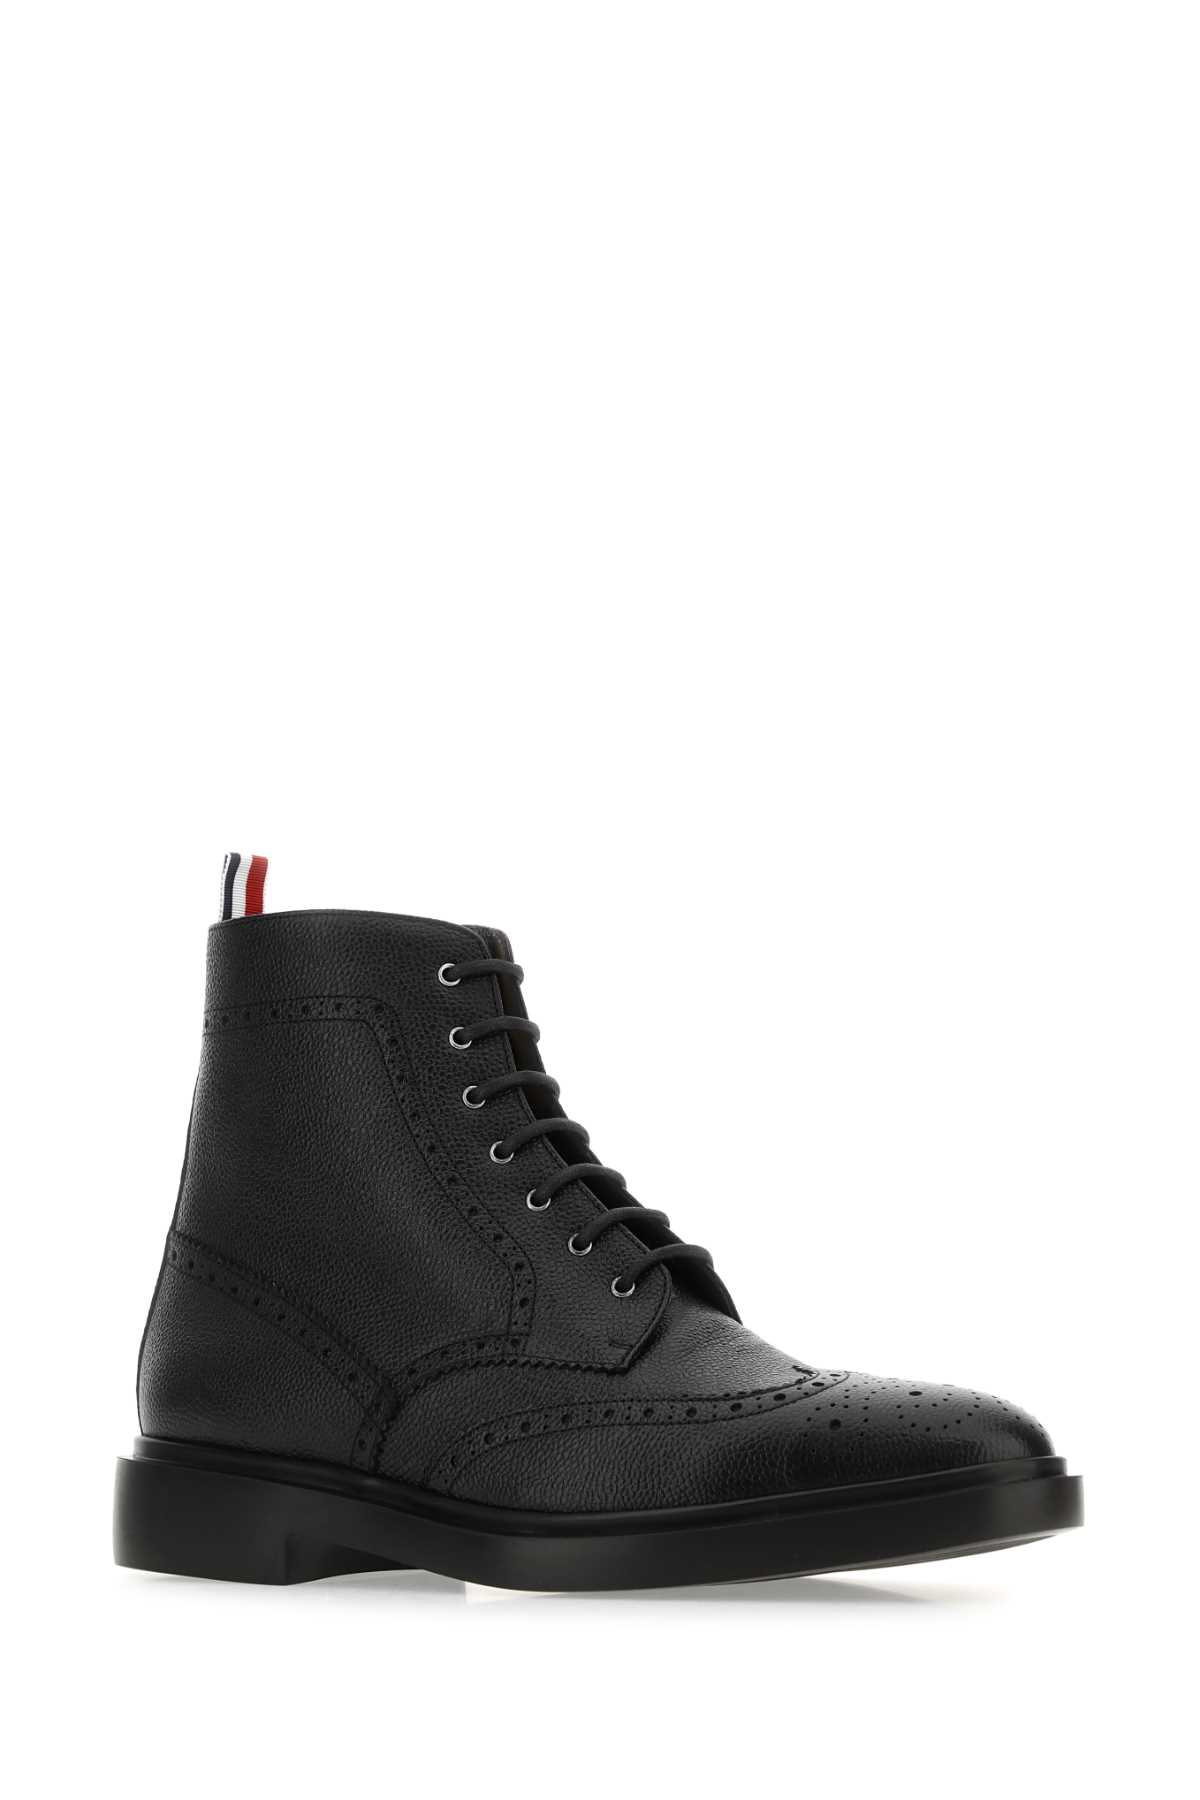 THOM BROWNE BLACK LEATHER ANKLE BOOTS